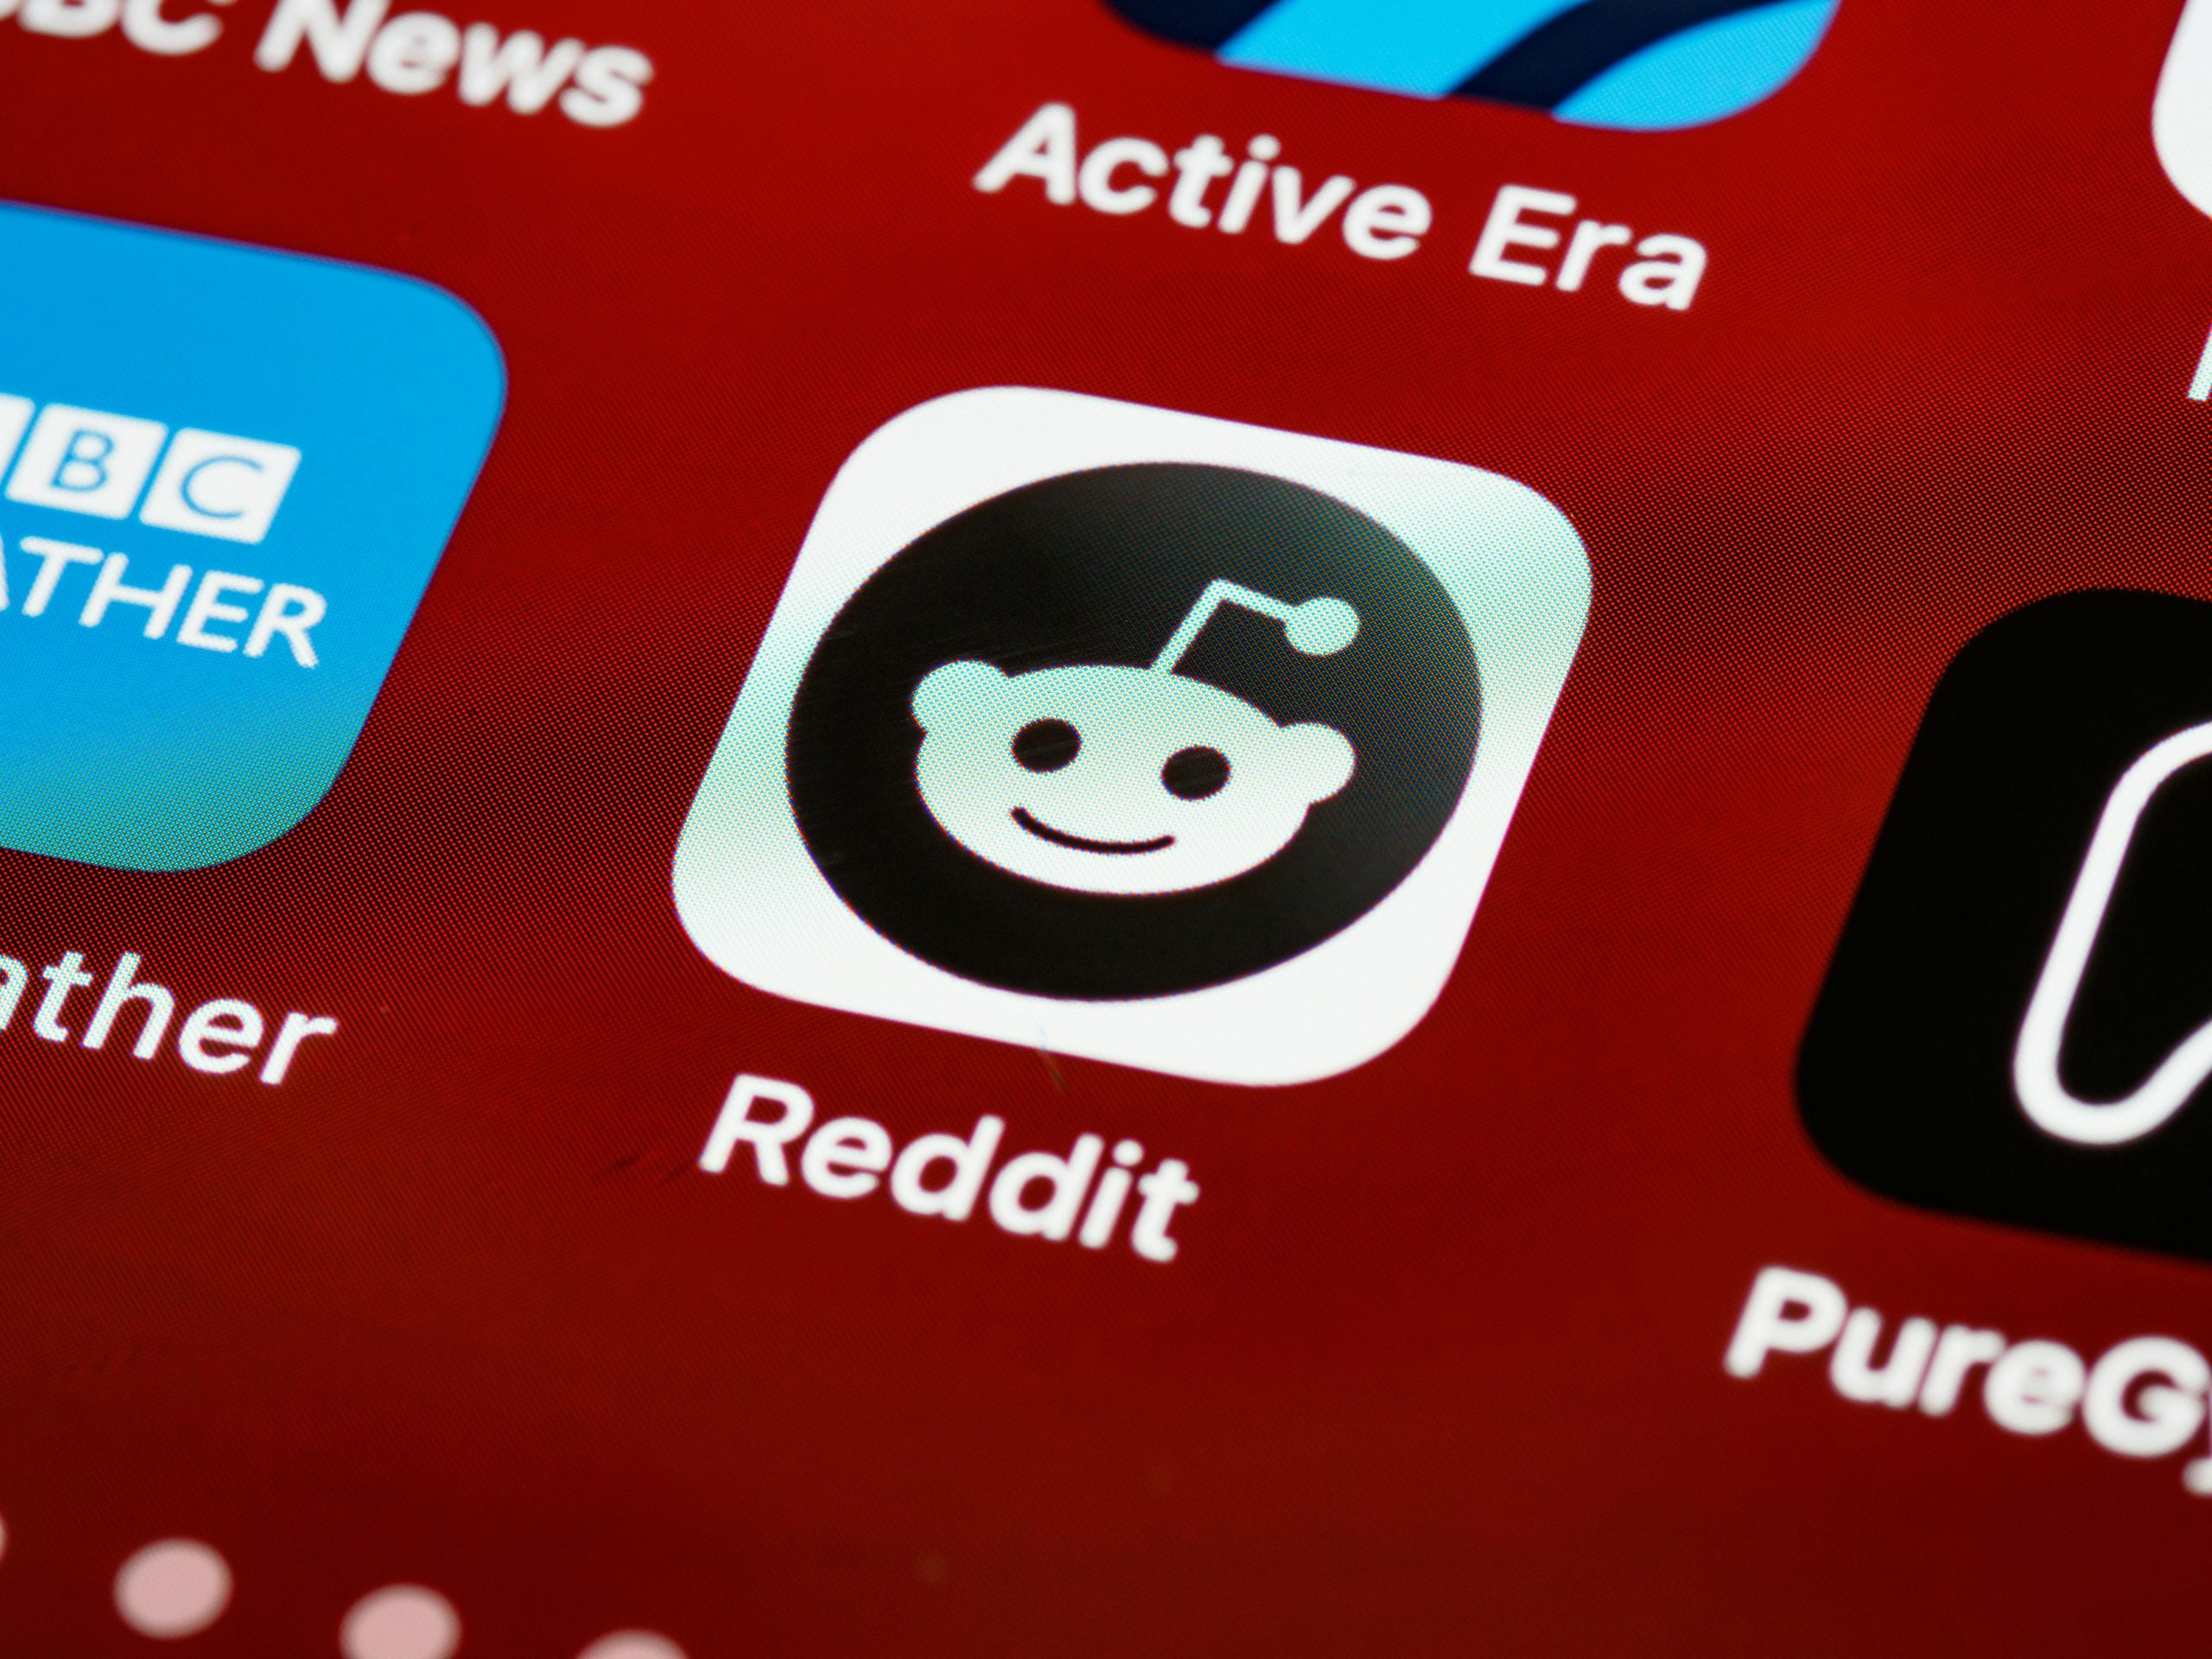 Reddit reportedly signs million annual deal with AI company